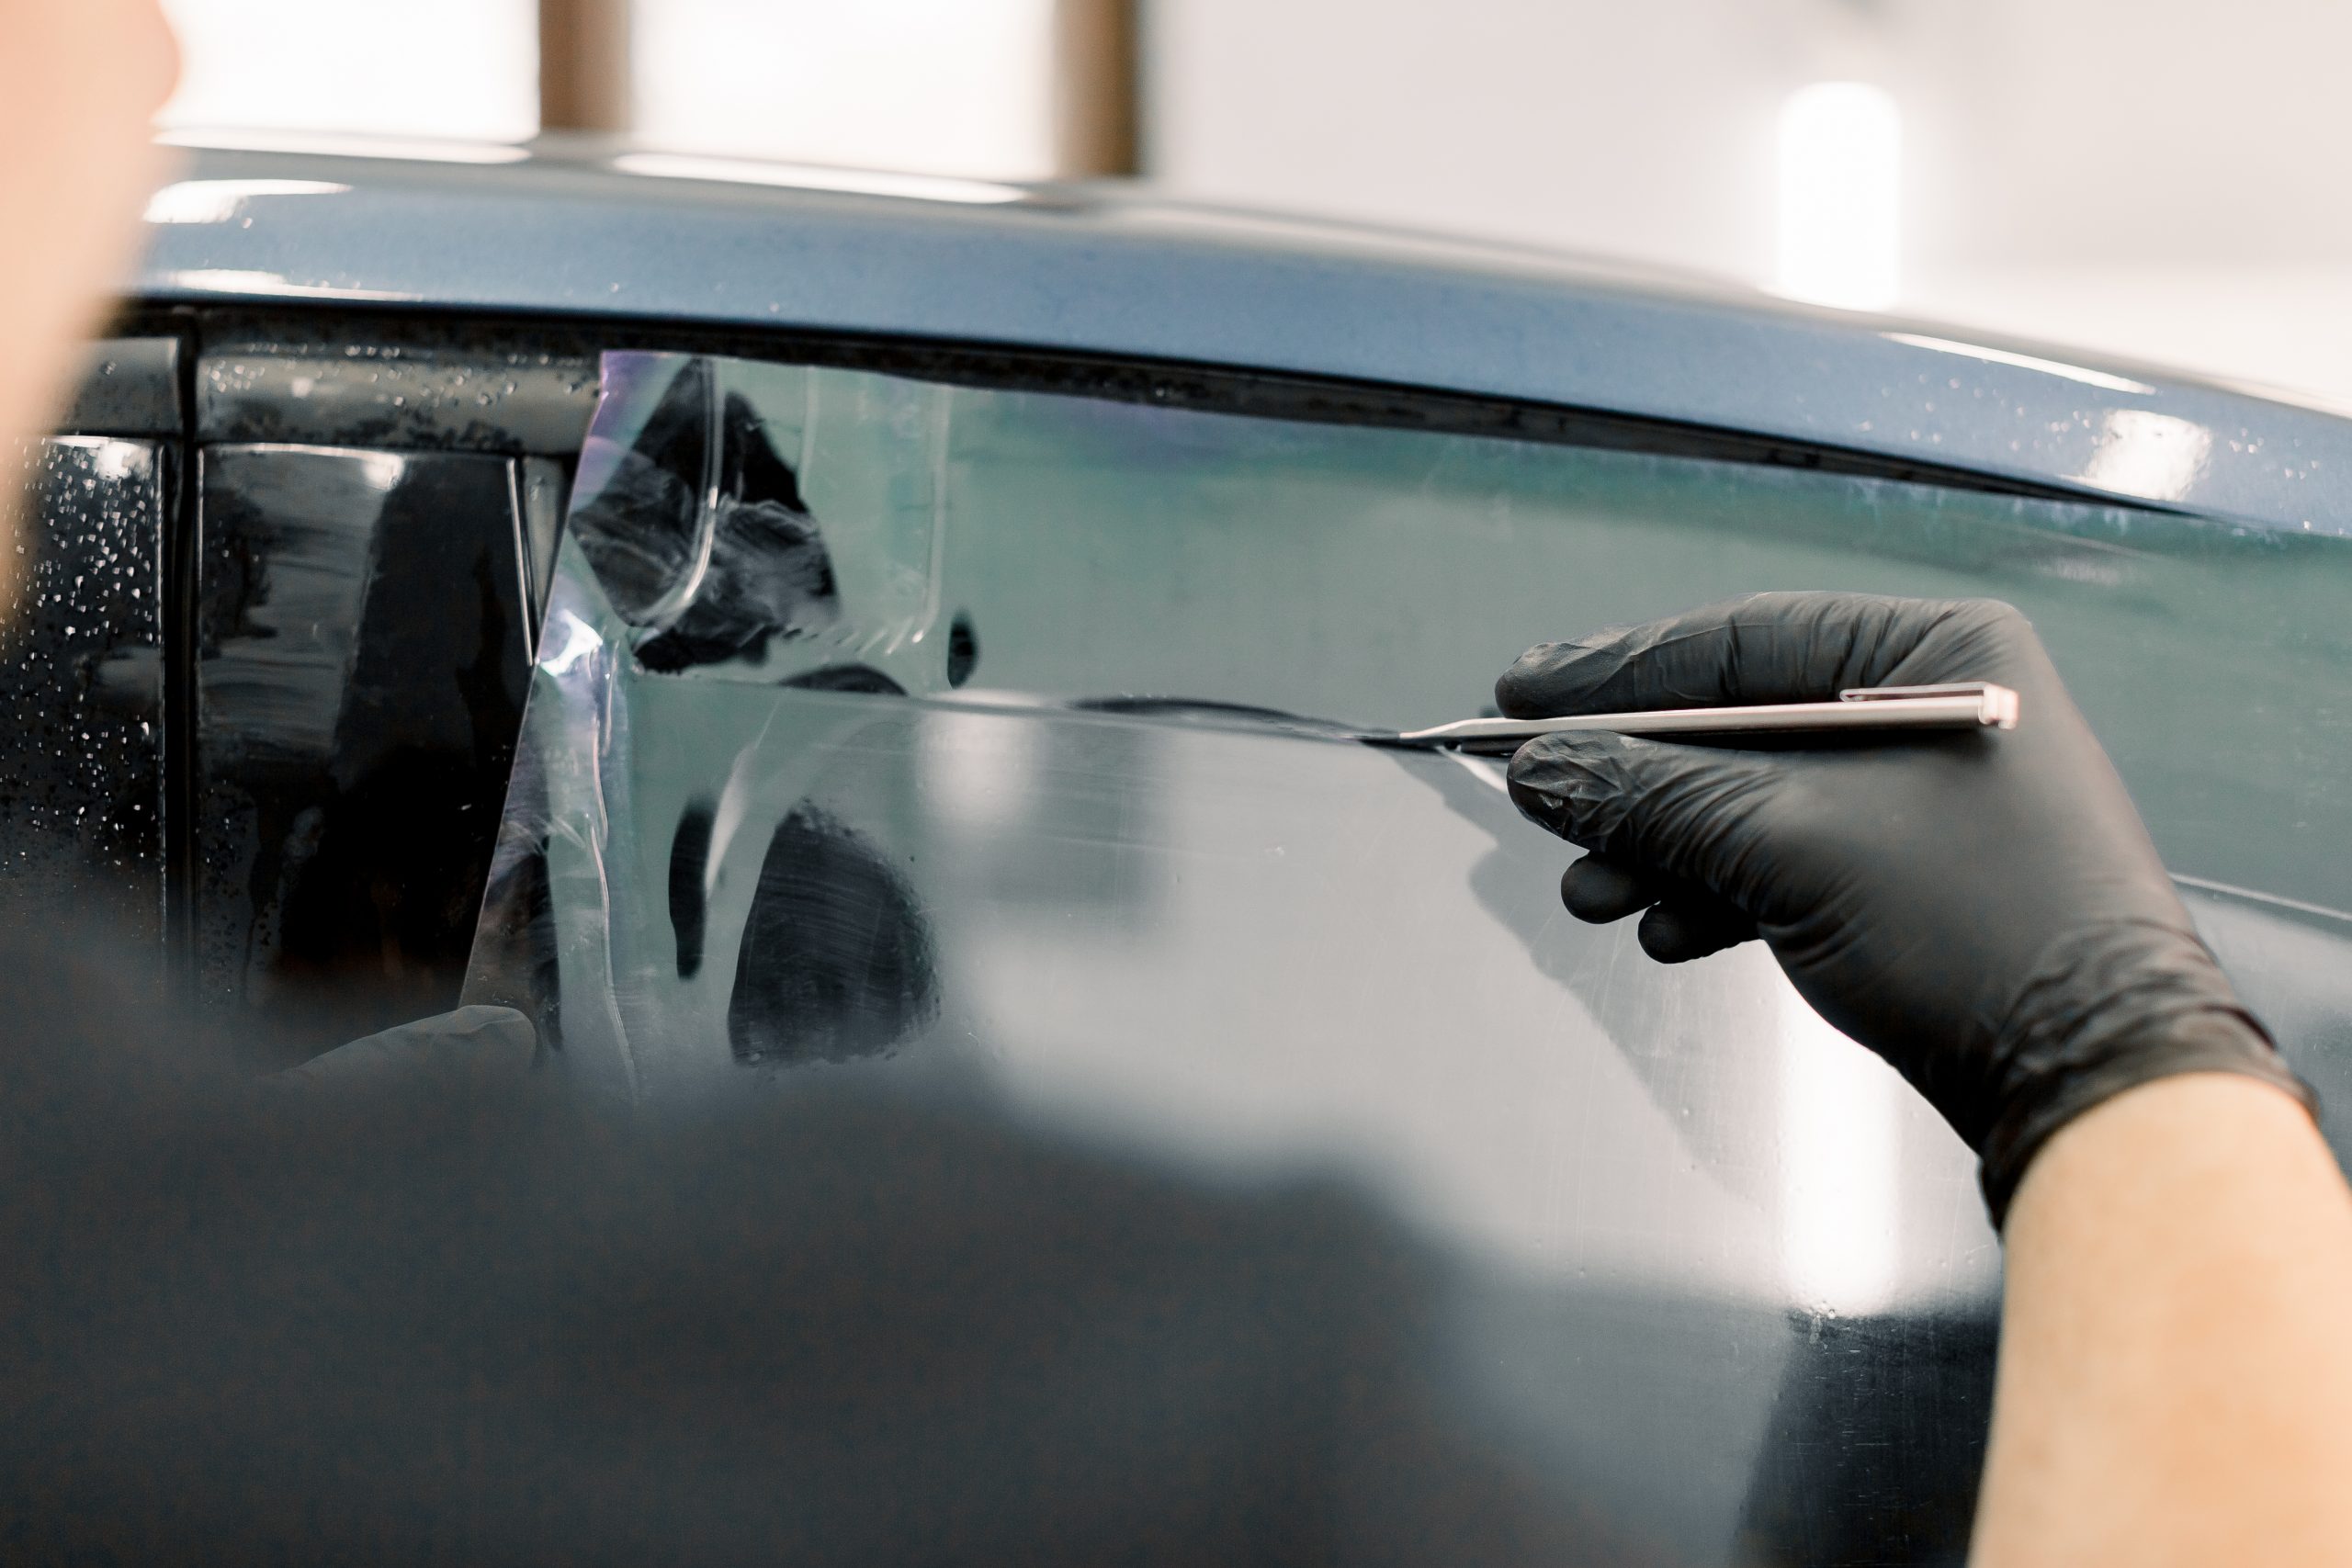 Cropped image of hands of worker in garage tinting a car window with tinted foil or film, holding special blade or knife to cut the film. Car detailing workshop, tinting windows.